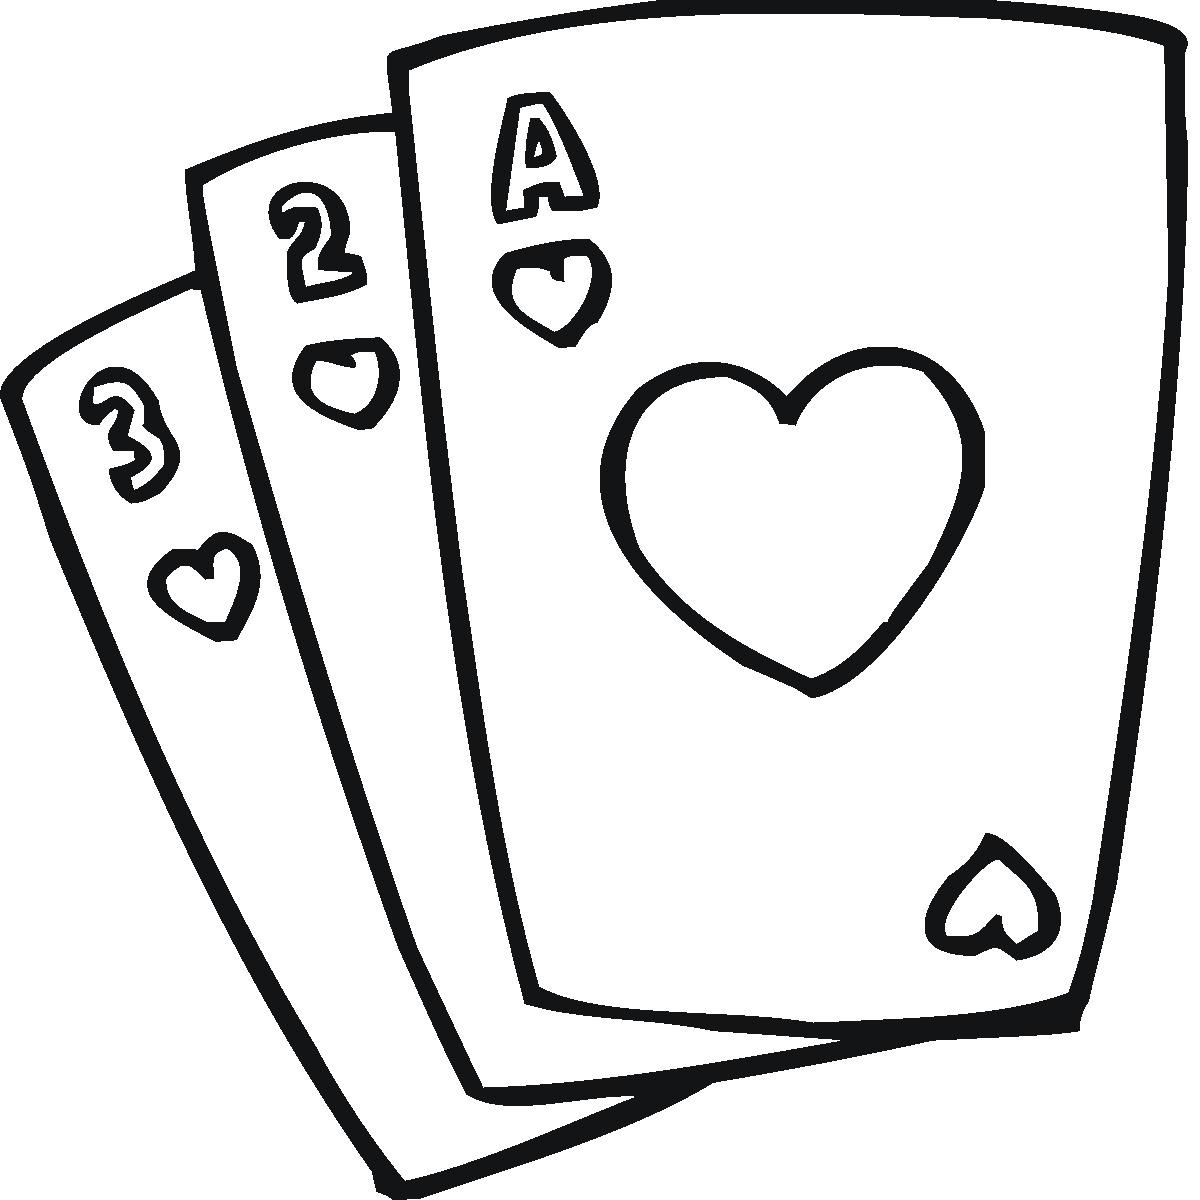 Clip Art Playing Cards - Blog - Playing Cards Clipart